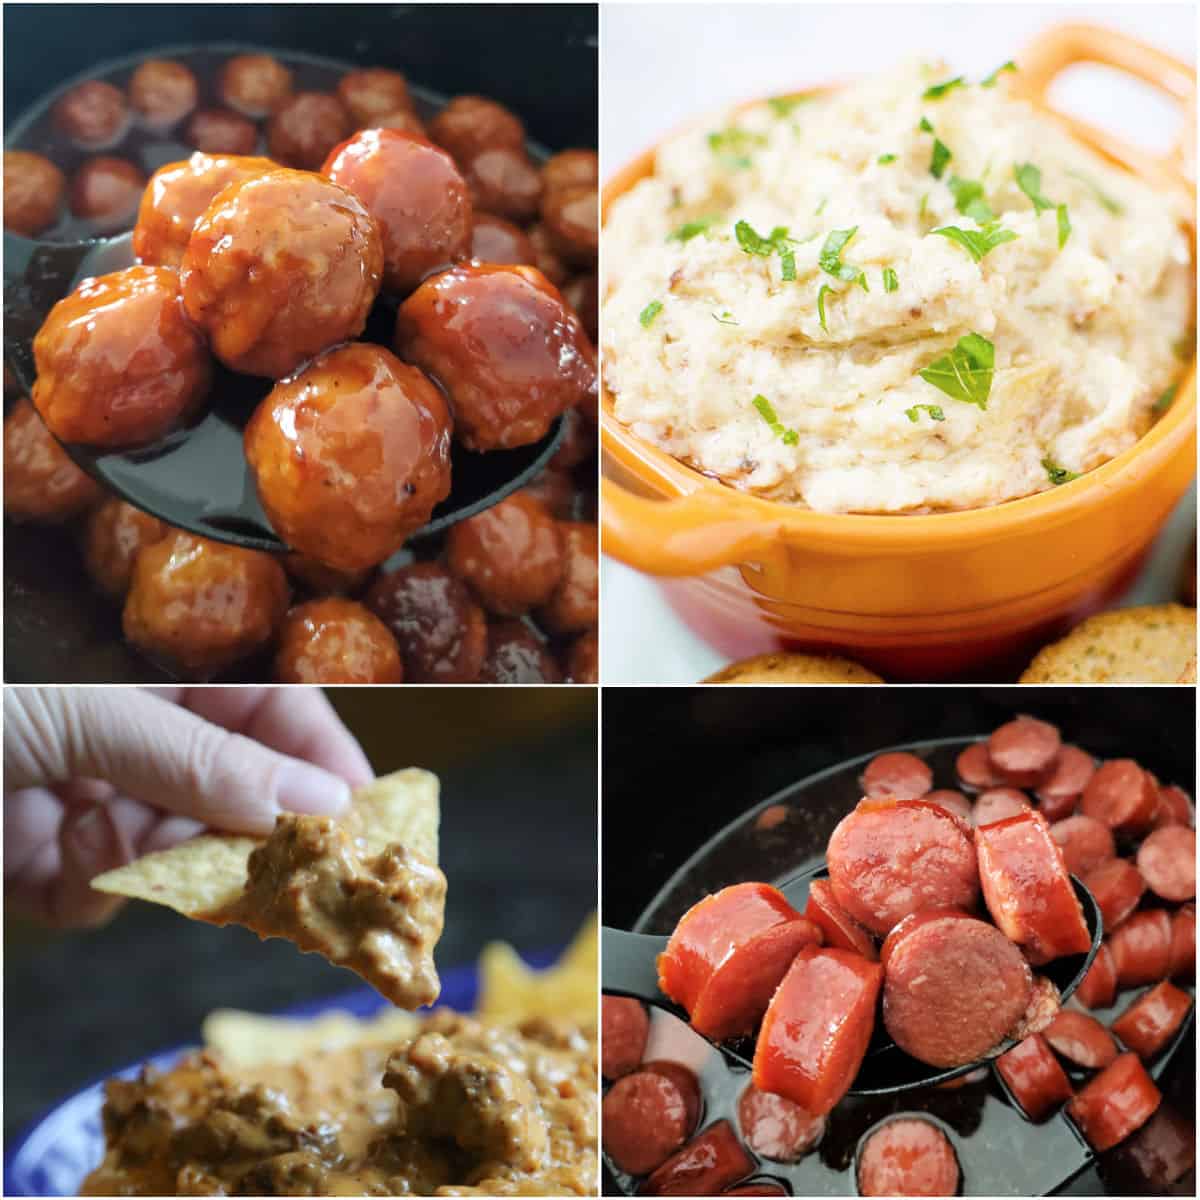 Spring Crock Pot Delights: 3 Fresh and Easy Recipes for the Season